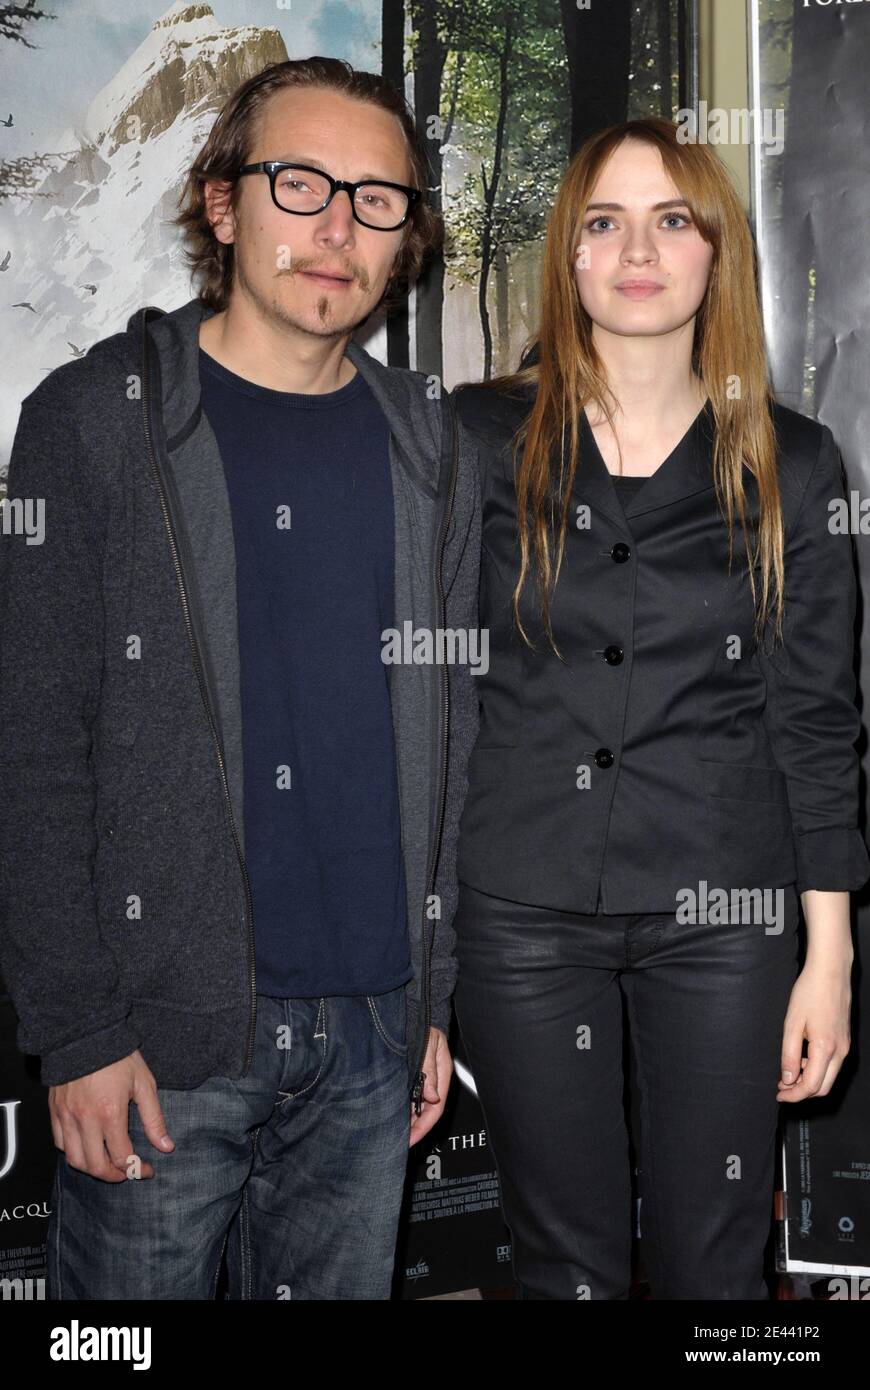 Lorant Deutsch and Sara Forestier attending the premiere of ' Humains ' at the UGC Cine Les Halles in Paris, France on April 17, 2009. Photo by Giancarlo Gorassini/ABACAPRESS.COM Stock Photo